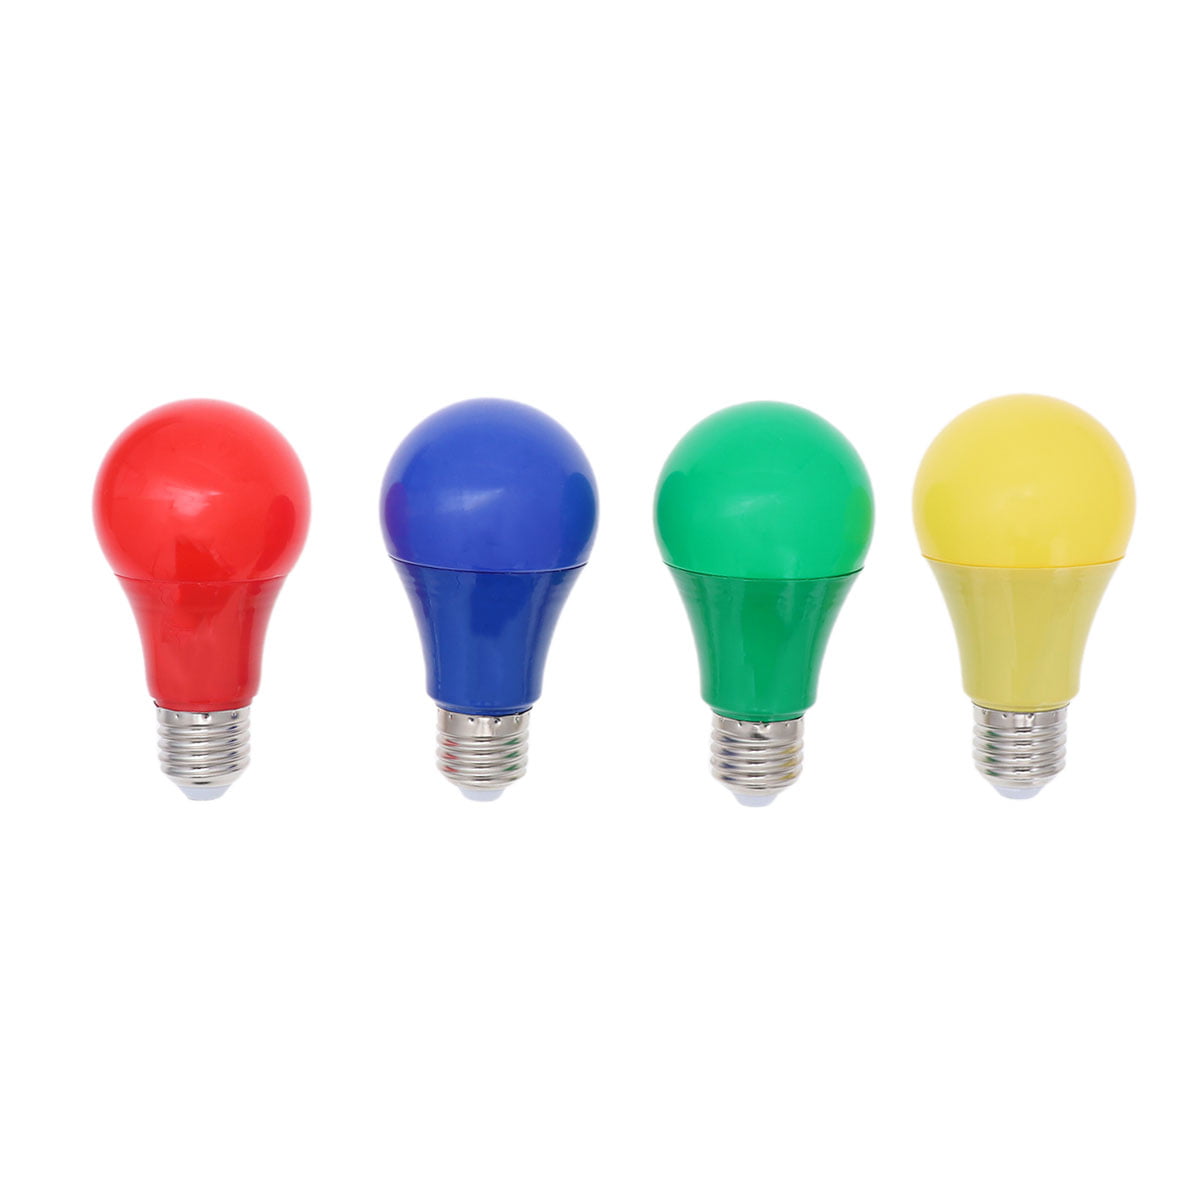 Ywoow Lamp Colorful Bulbs Colorful Bulbs E27 Energy Saving Led Bulb Color Incandescent Party Decoration Colorful Bulbs 